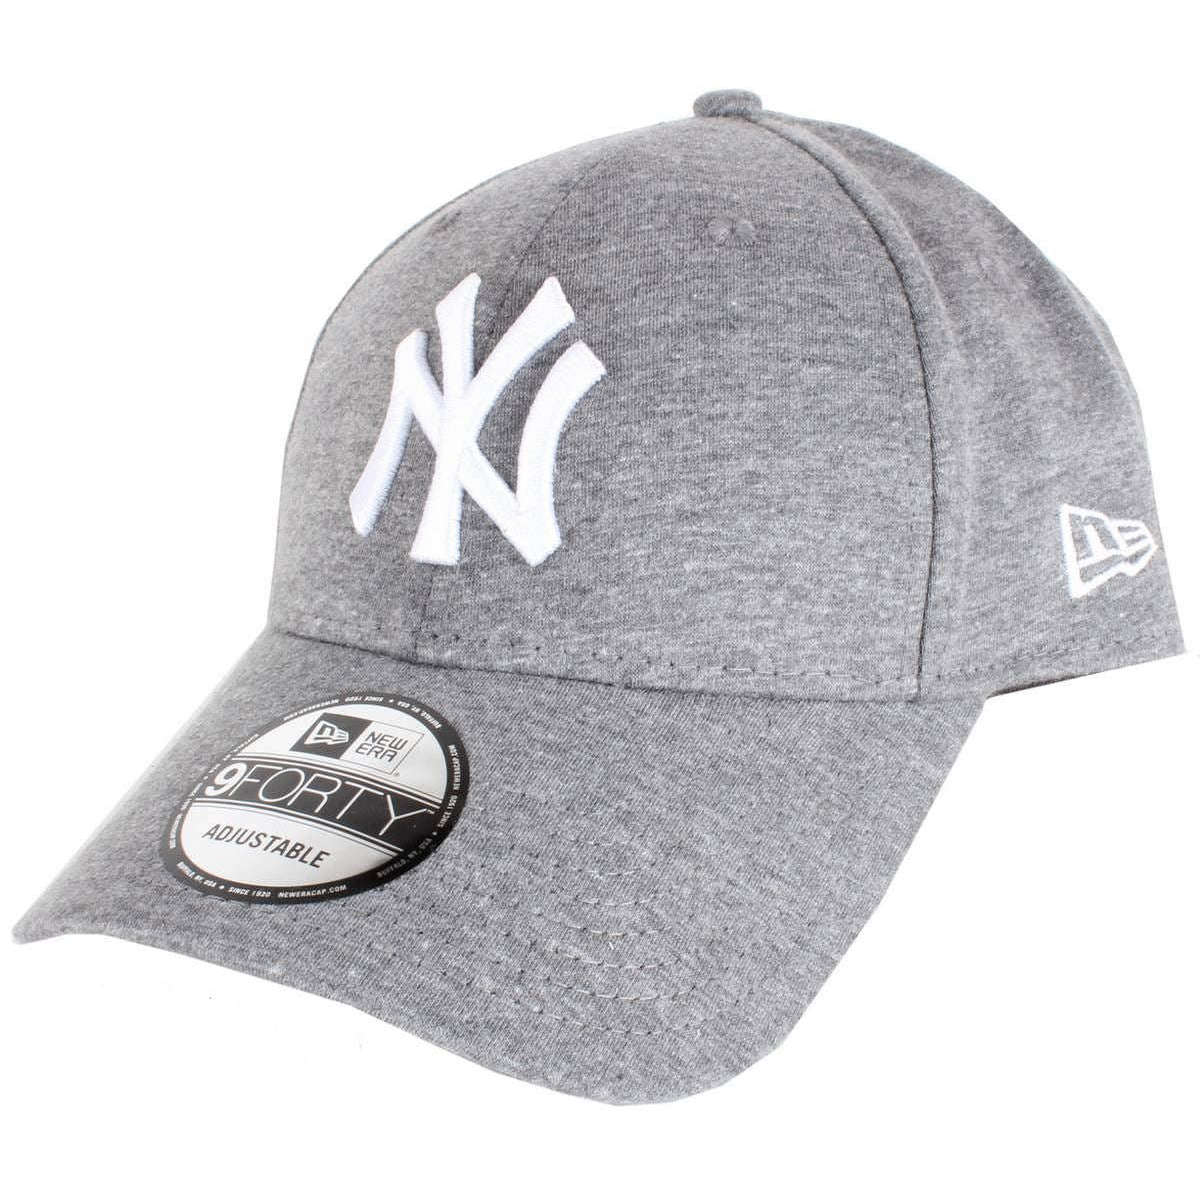 New Era 9FORTY Jersey Essential New York Yankees Cap - Grey/White